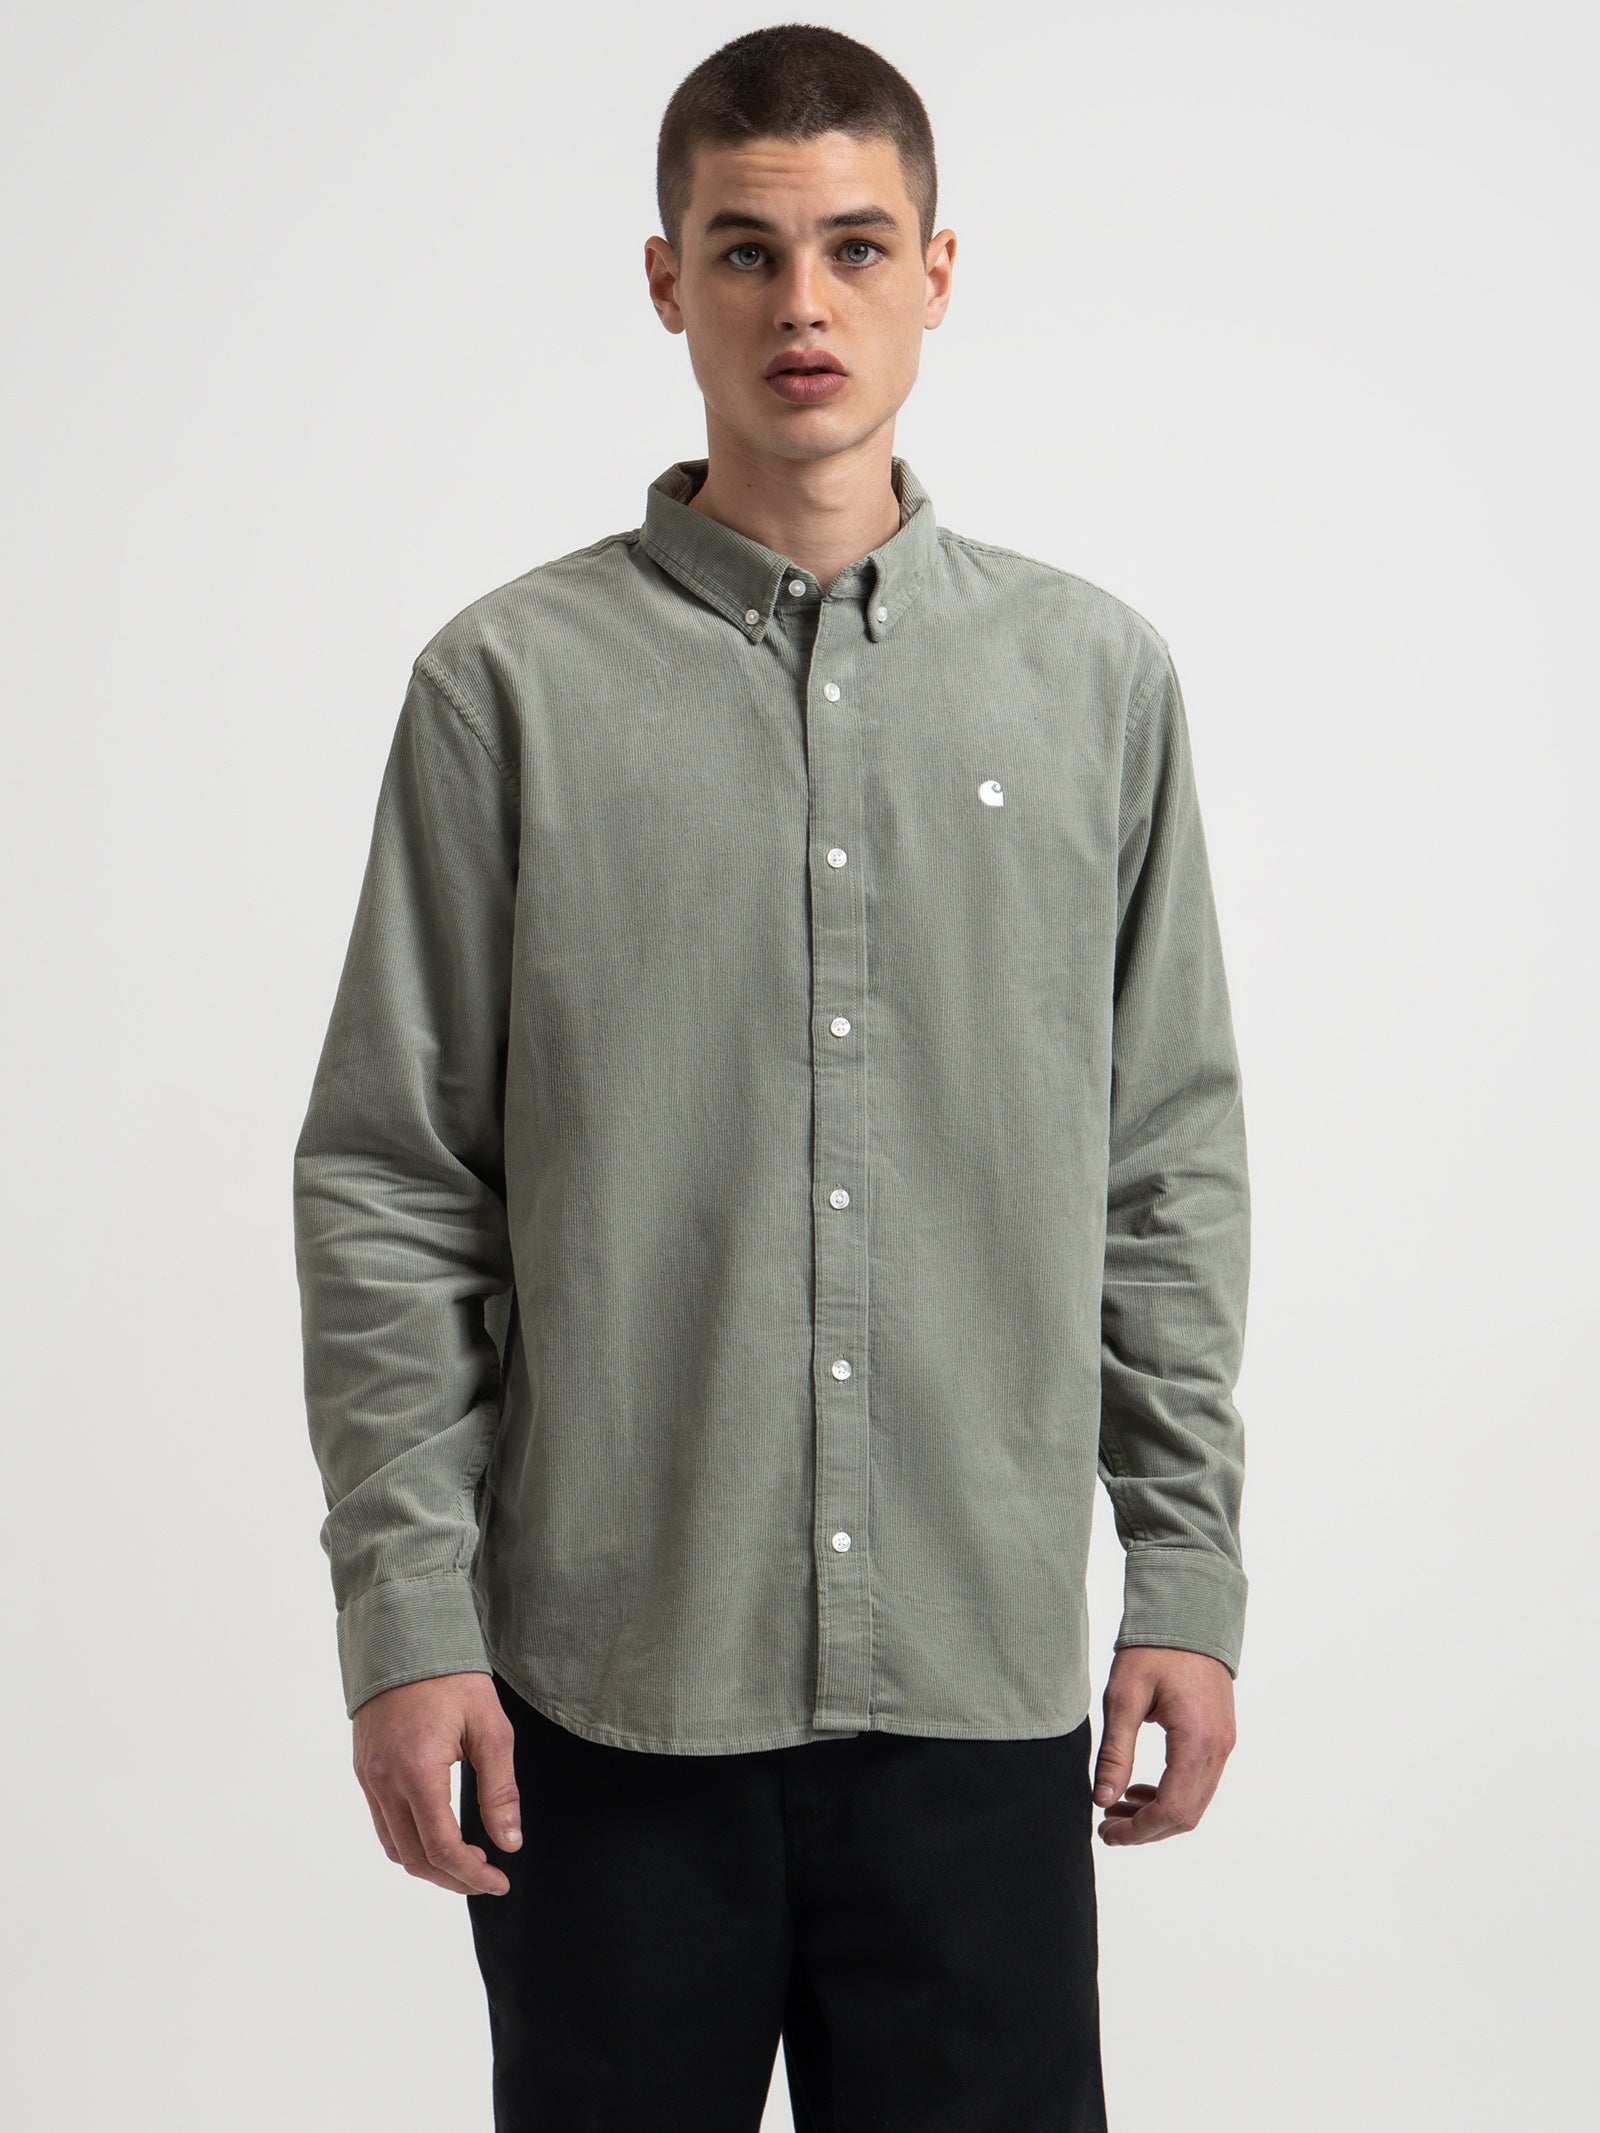 Long Sleeve Madison Fine Cord Shirt in Yucca & White